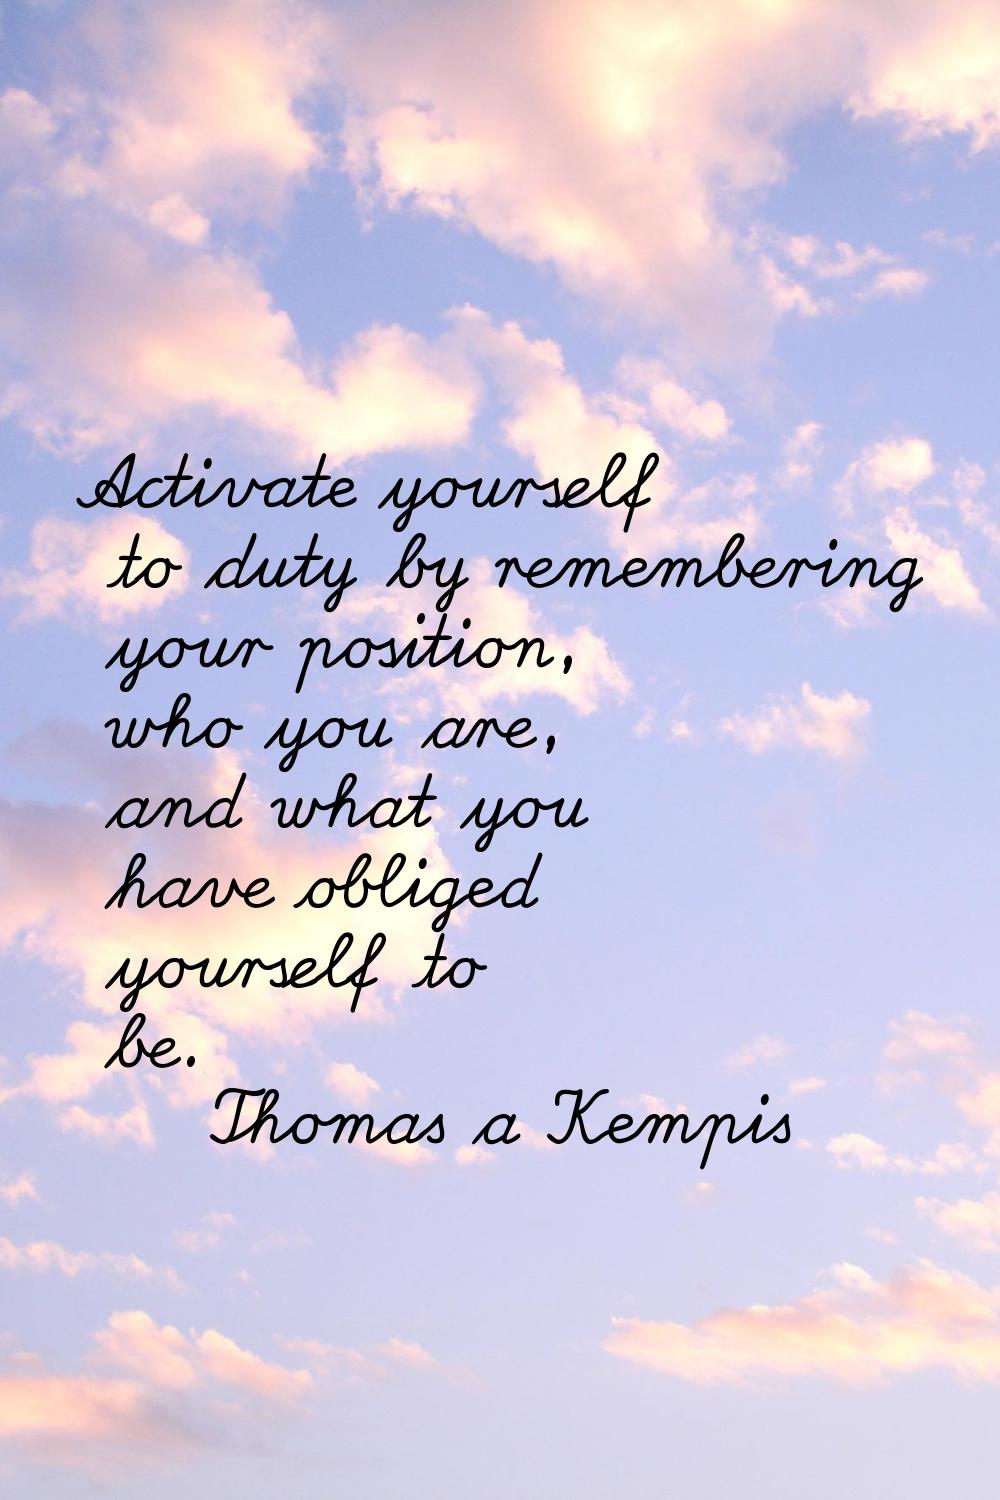 Activate yourself to duty by remembering your position, who you are, and what you have obliged your